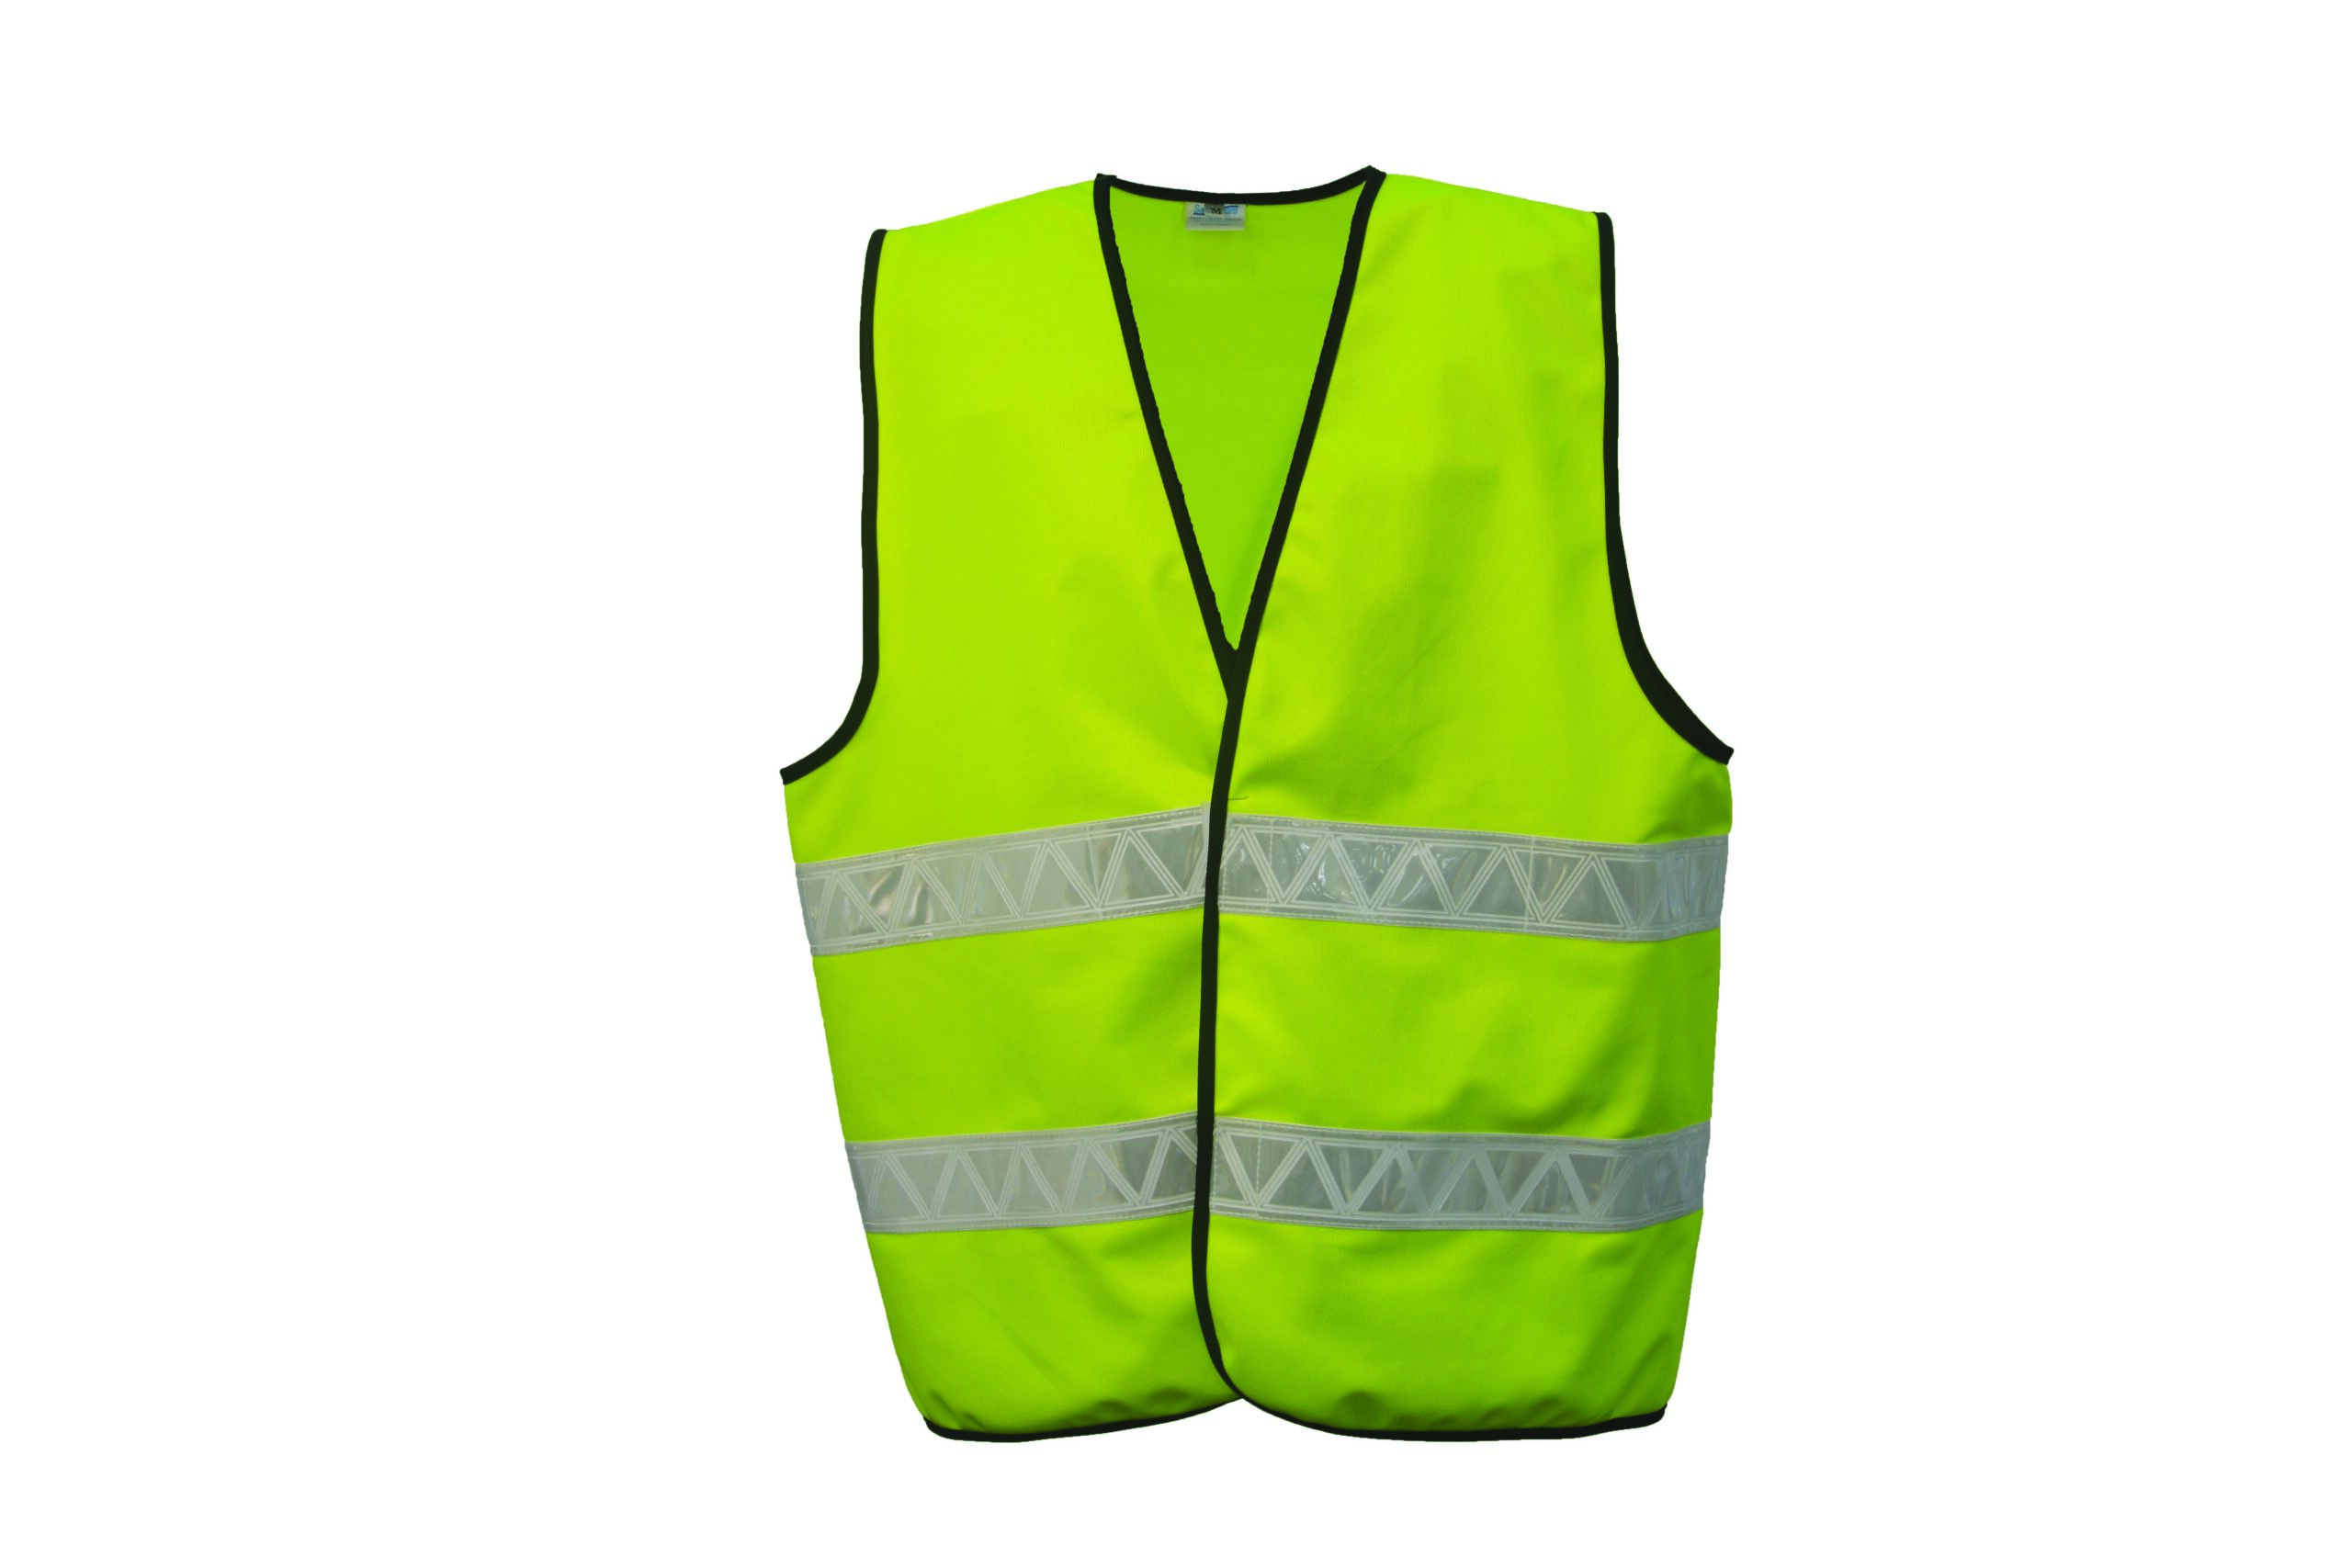 Surveyor Yellow  Pink Two Tones Safety Vest ANSI ISEA Photo ID Pocket   Trường THPT Anhxtanh